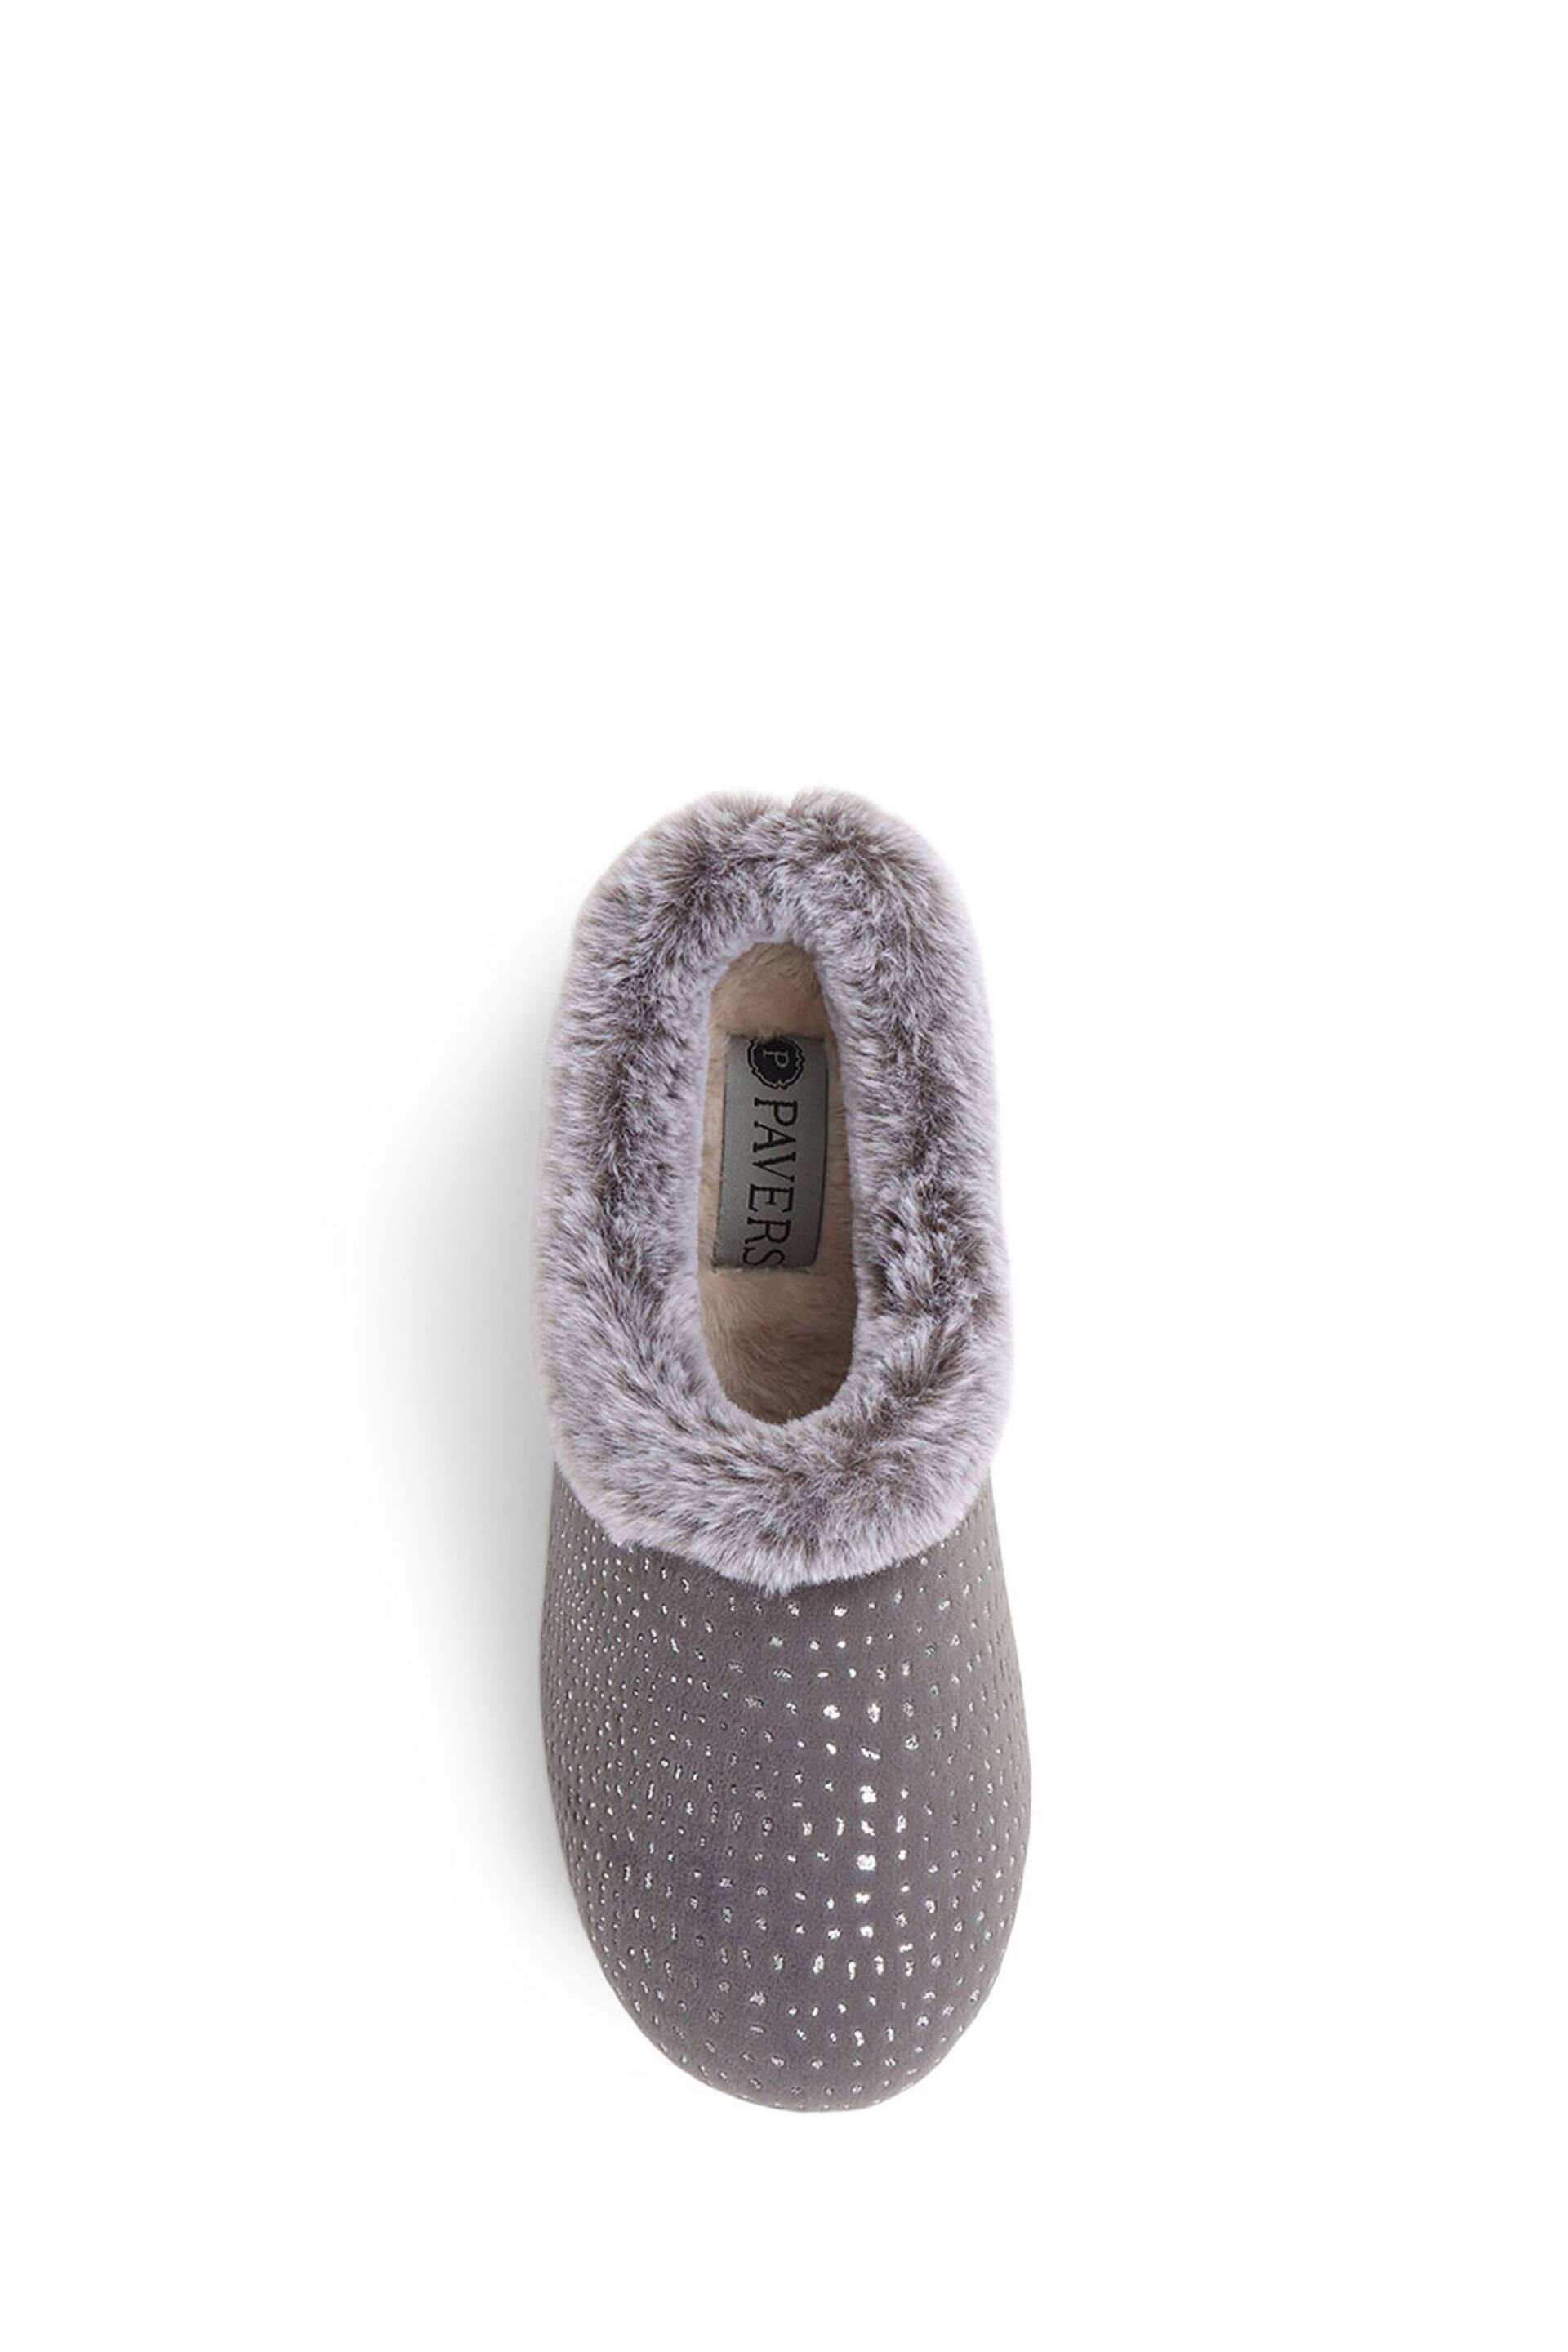 Pavers Grey Patterned Full Slippers - Image 4 of 5